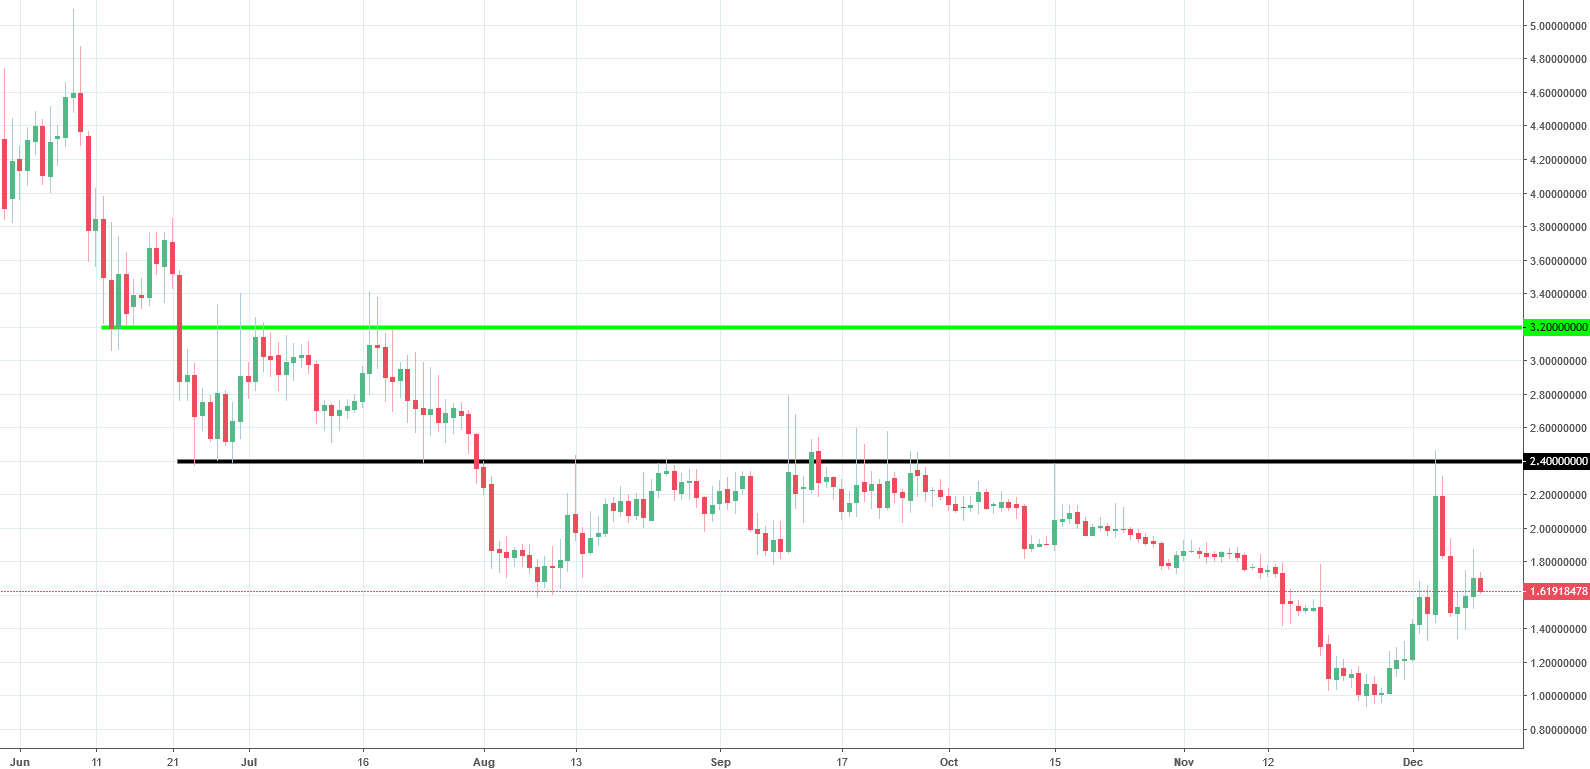 Waves Analysis - strong resistance at $2.4